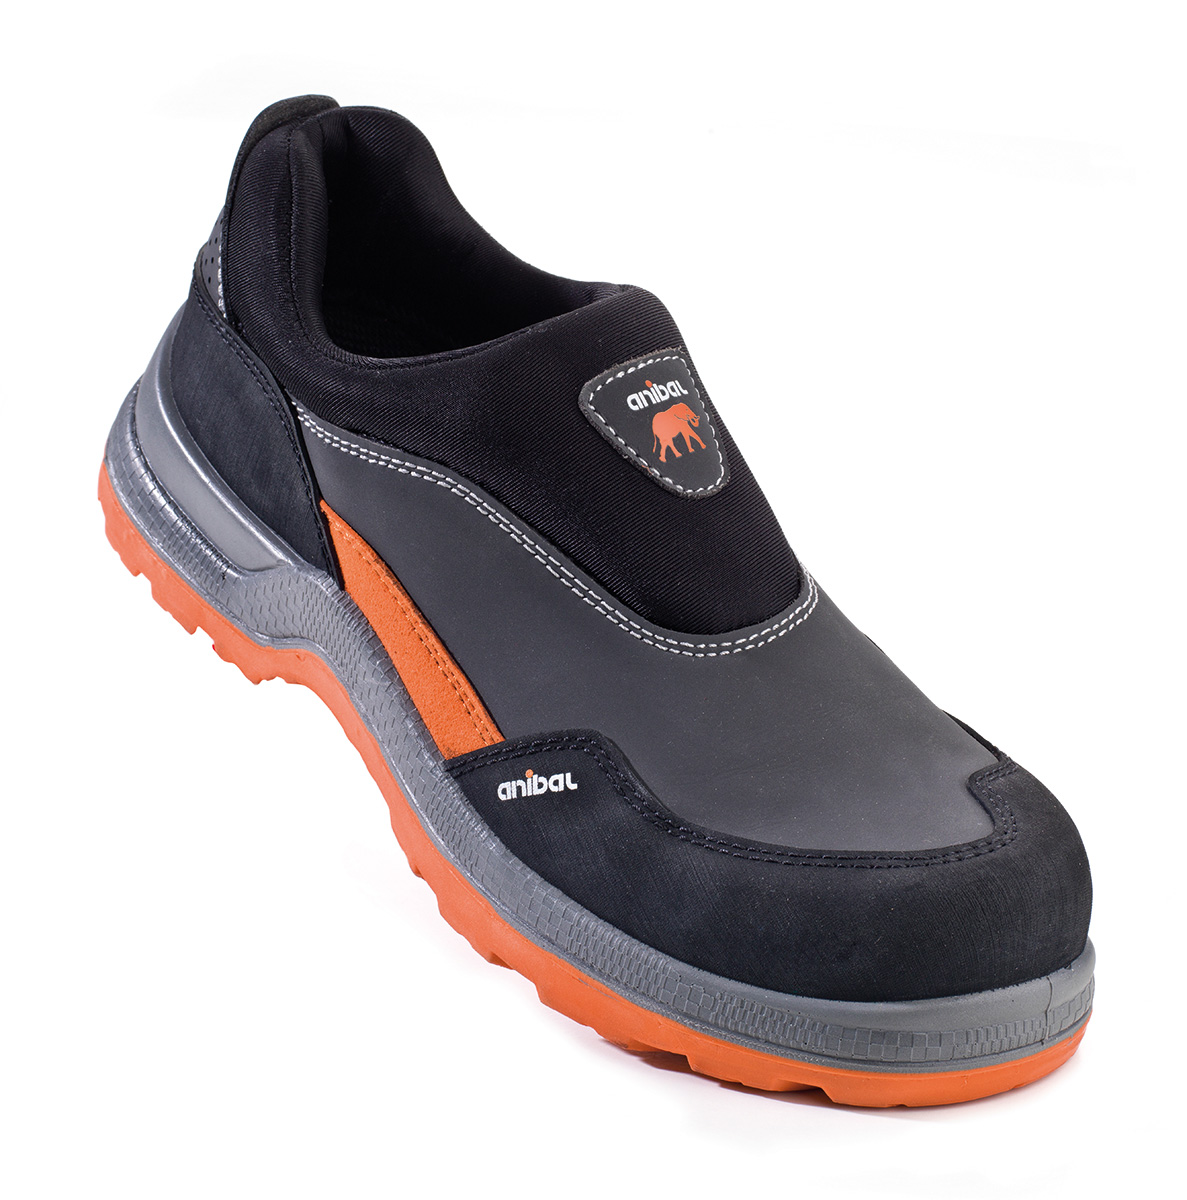 1688-ZA Safety Footwear Sporty  Mod. “ATENAS”. Moccasin style shoe of suede leather on S1P. Polyurethane double density SRC sole. 